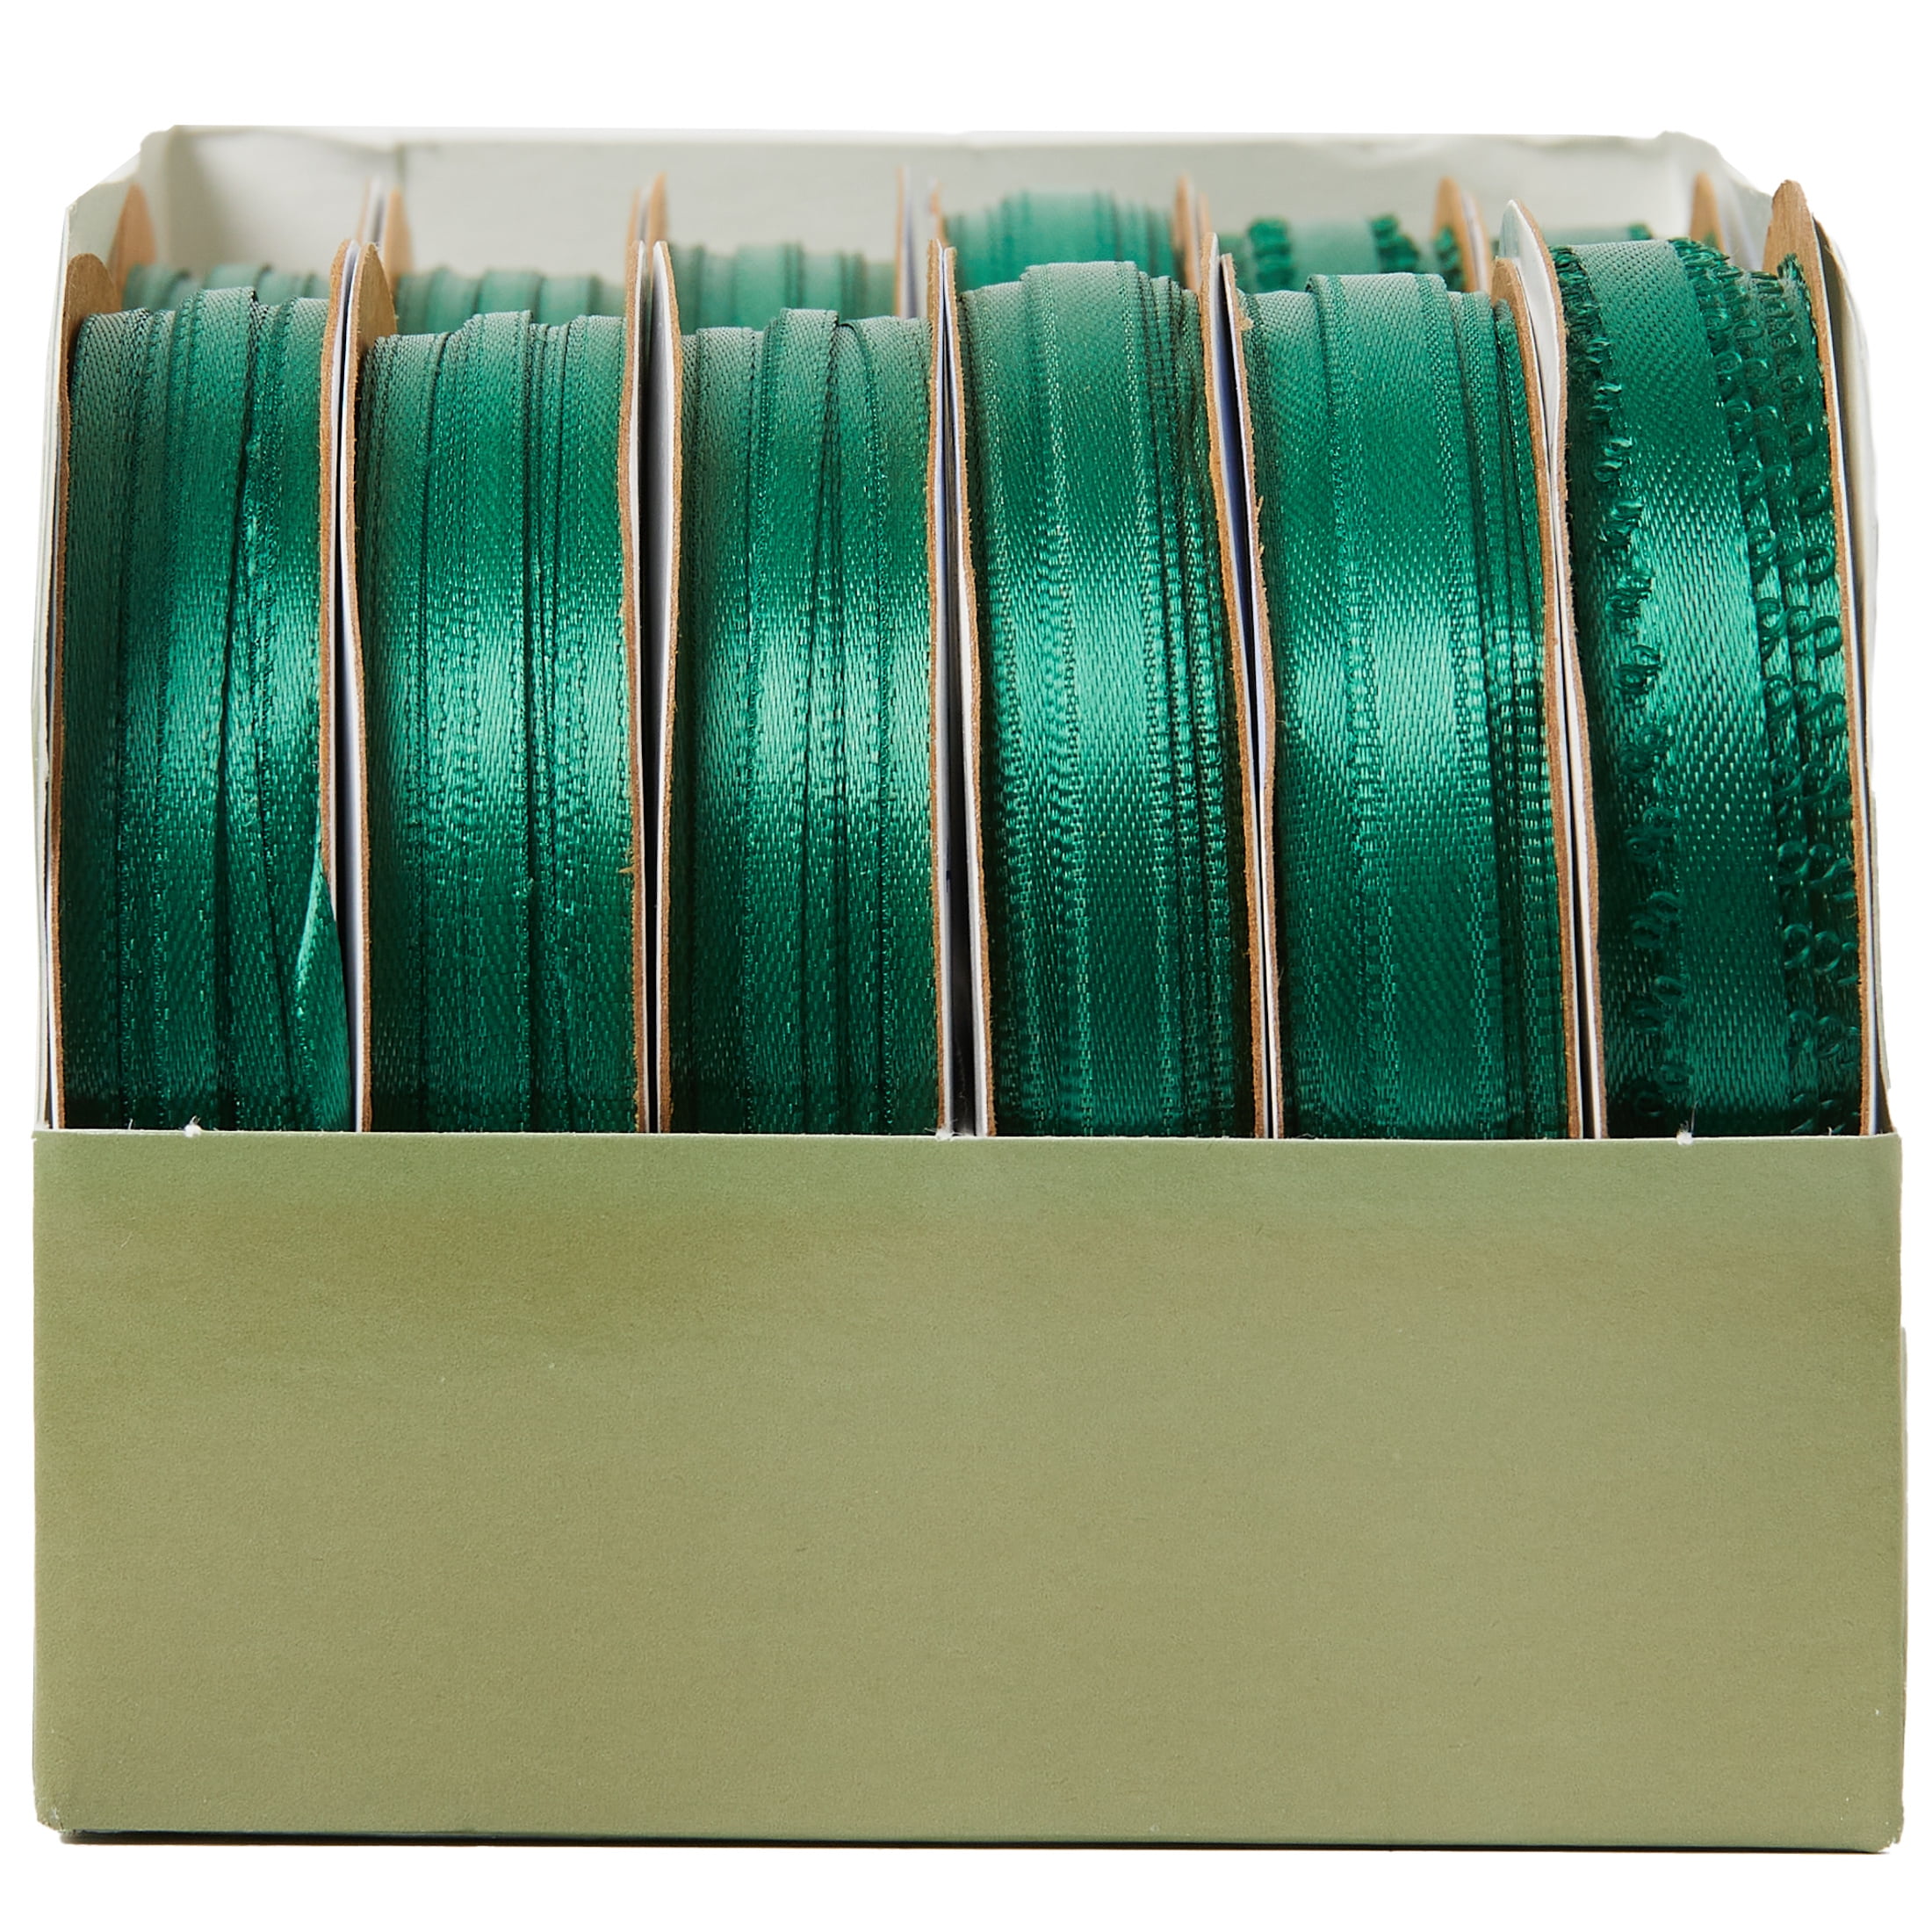 Forest Green Deluxe Satin Ribbon (7/8 x 100 Yards) at JAM Paper